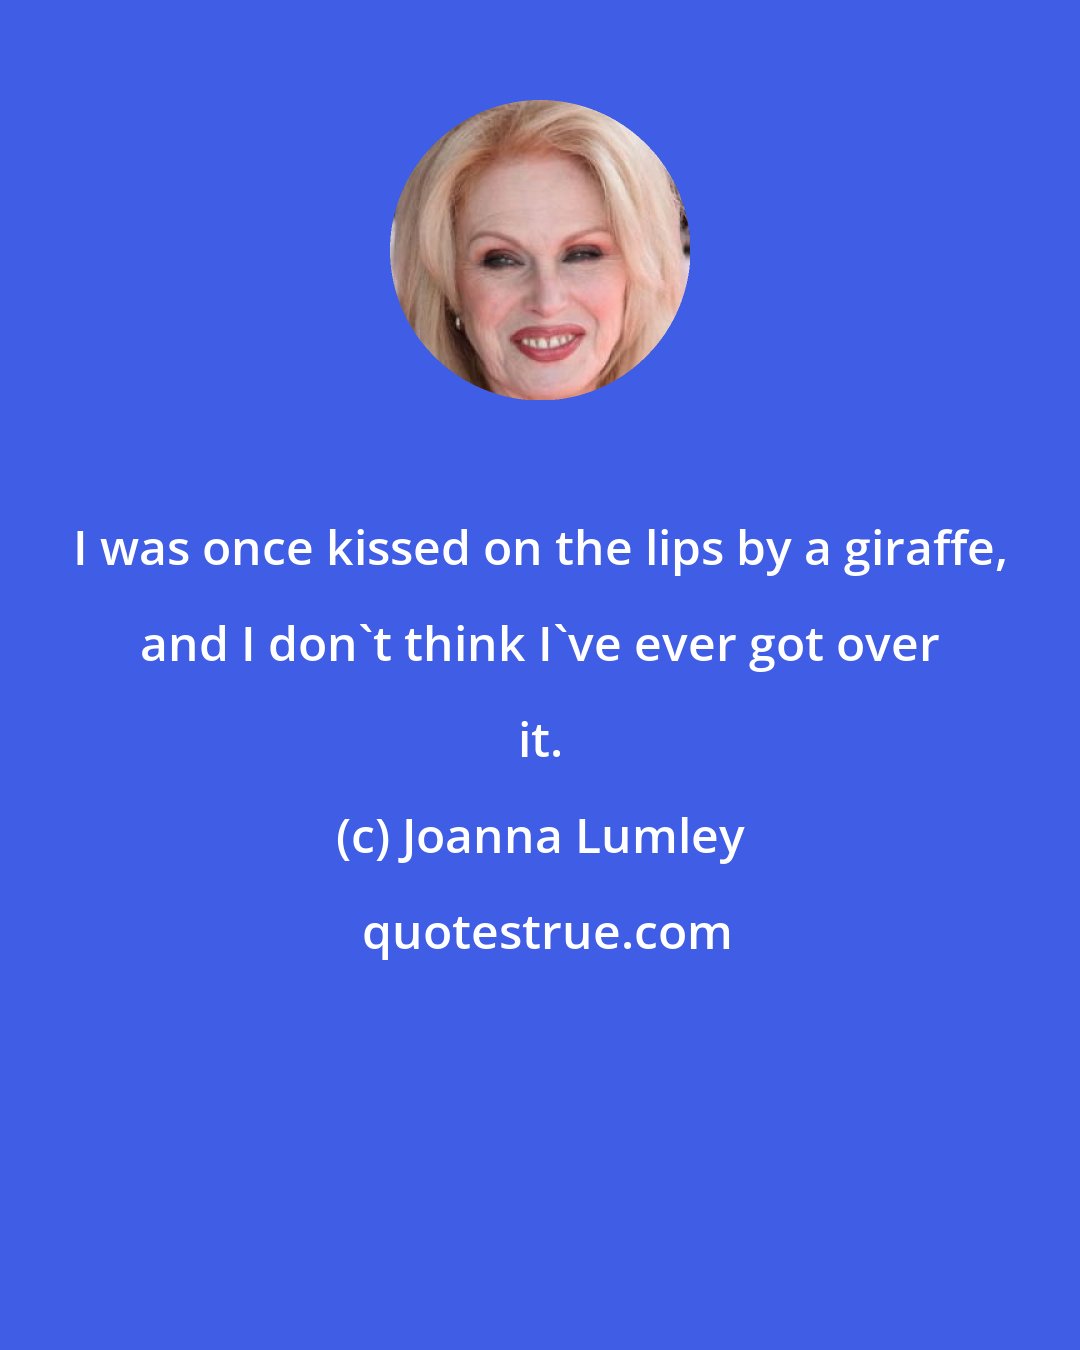 Joanna Lumley: I was once kissed on the lips by a giraffe, and I don't think I've ever got over it.